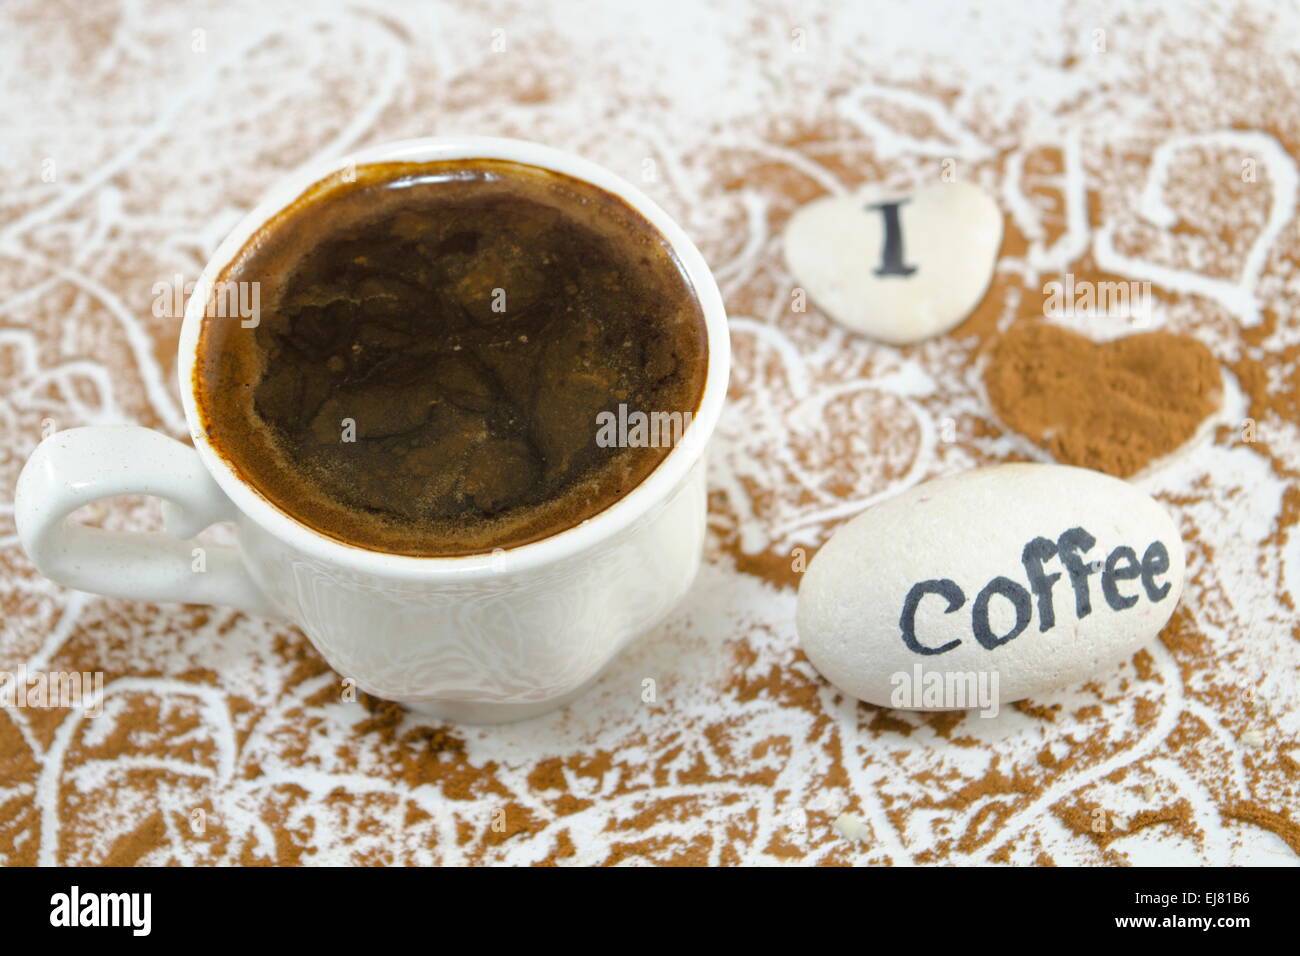 White cup of coffee  and rocks saying 'I love coffee' Stock Photo